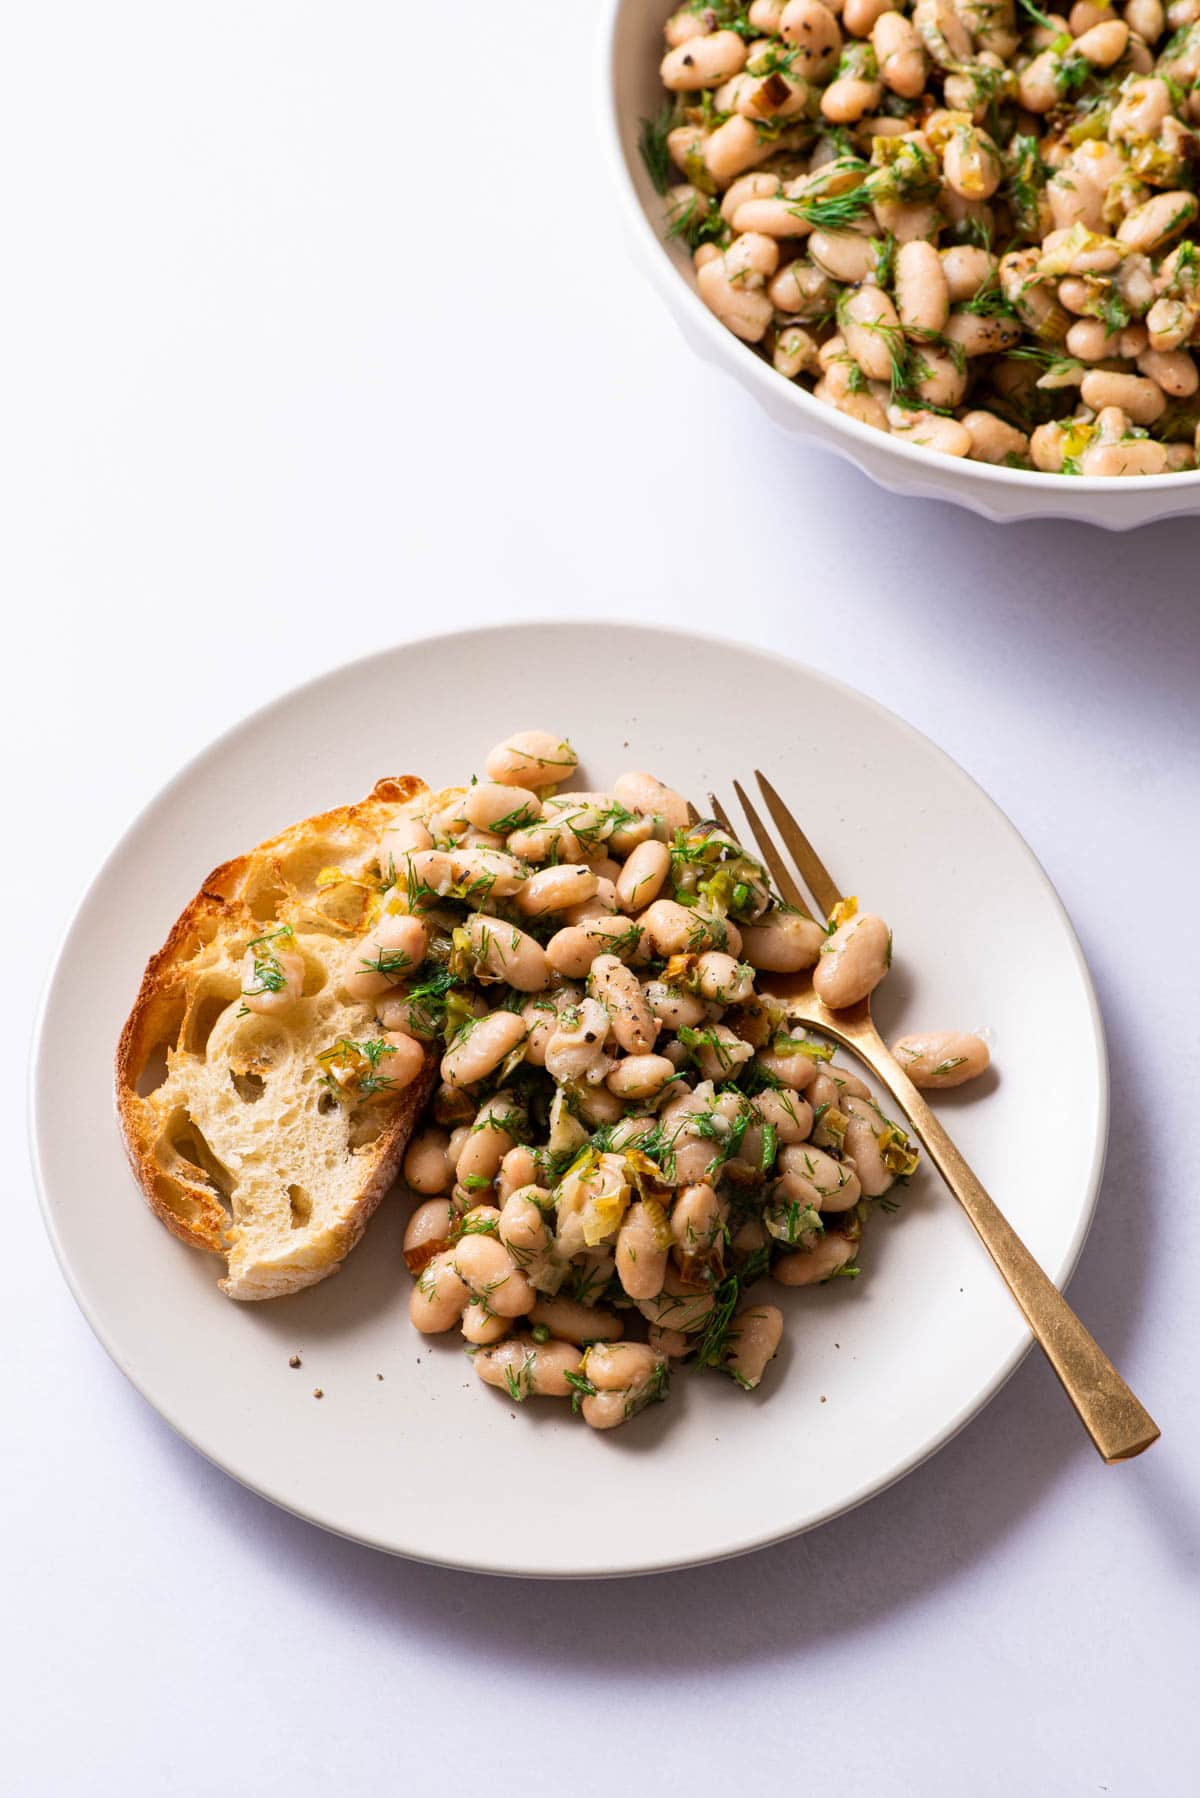 Herby white bean salad on a plate with toast.